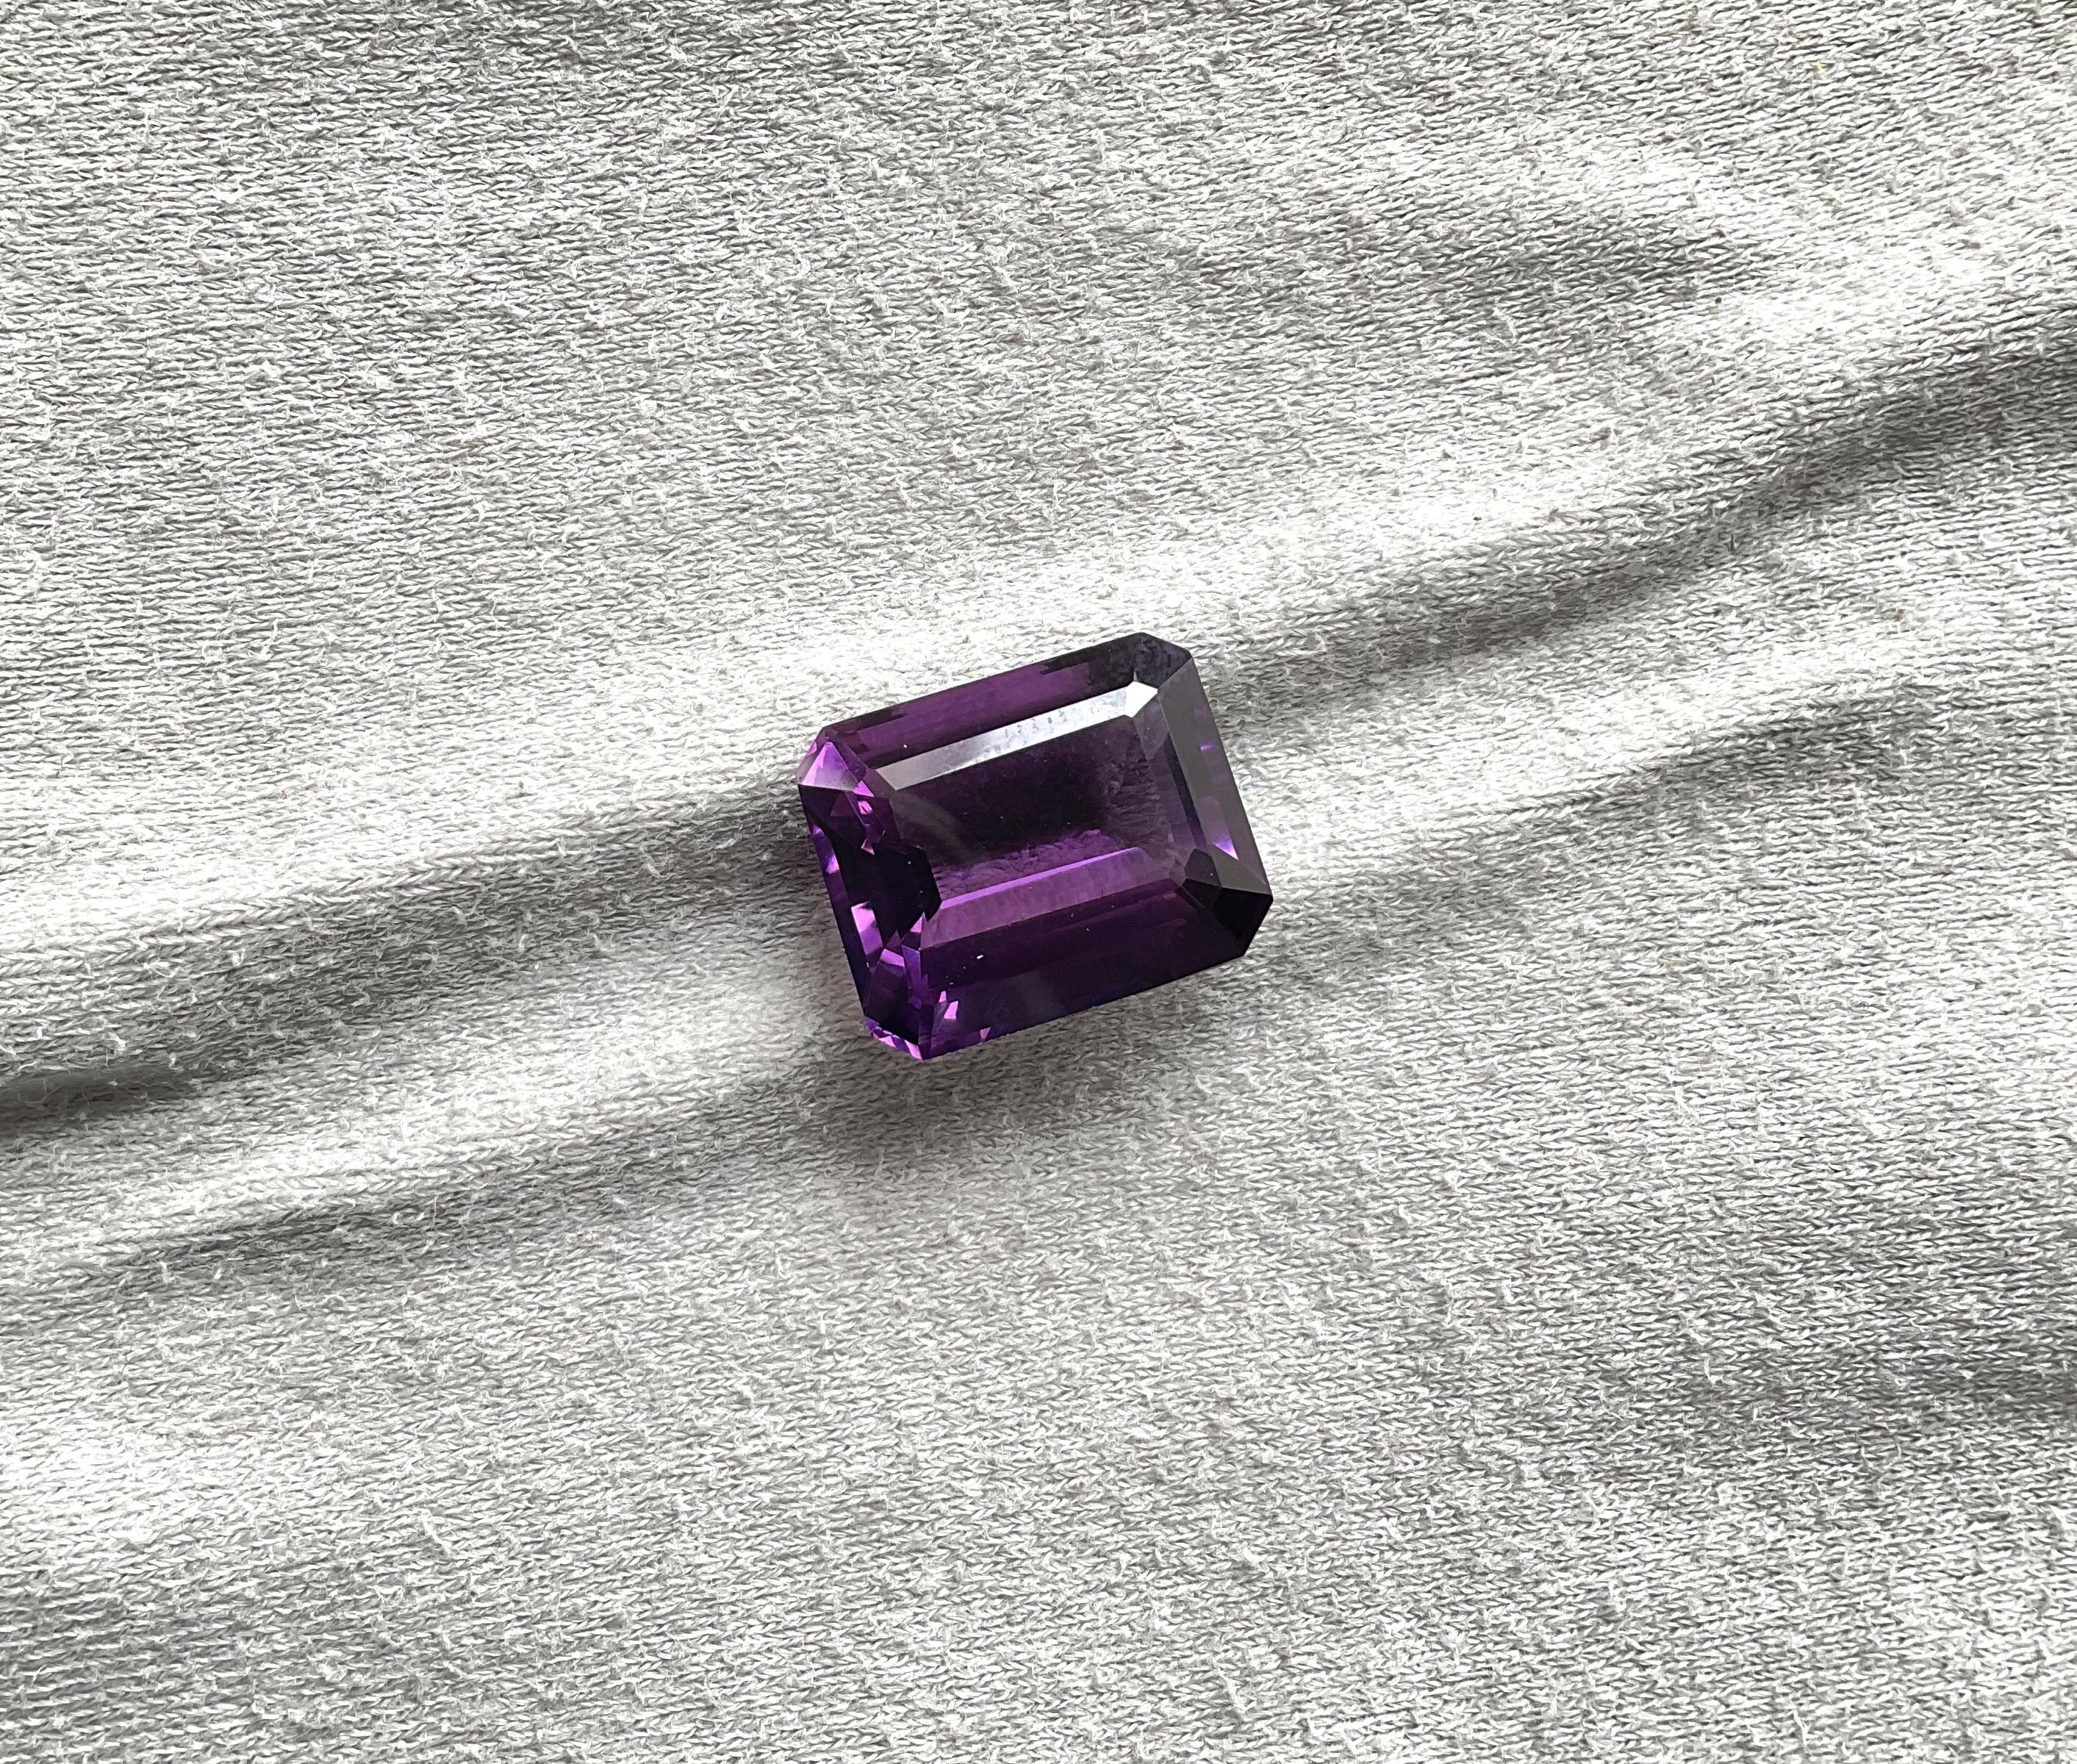 18.67 Carat Amethyst Top Quality Faceted Octagon Cut stone Gemstone For Jewelry  For Sale 2